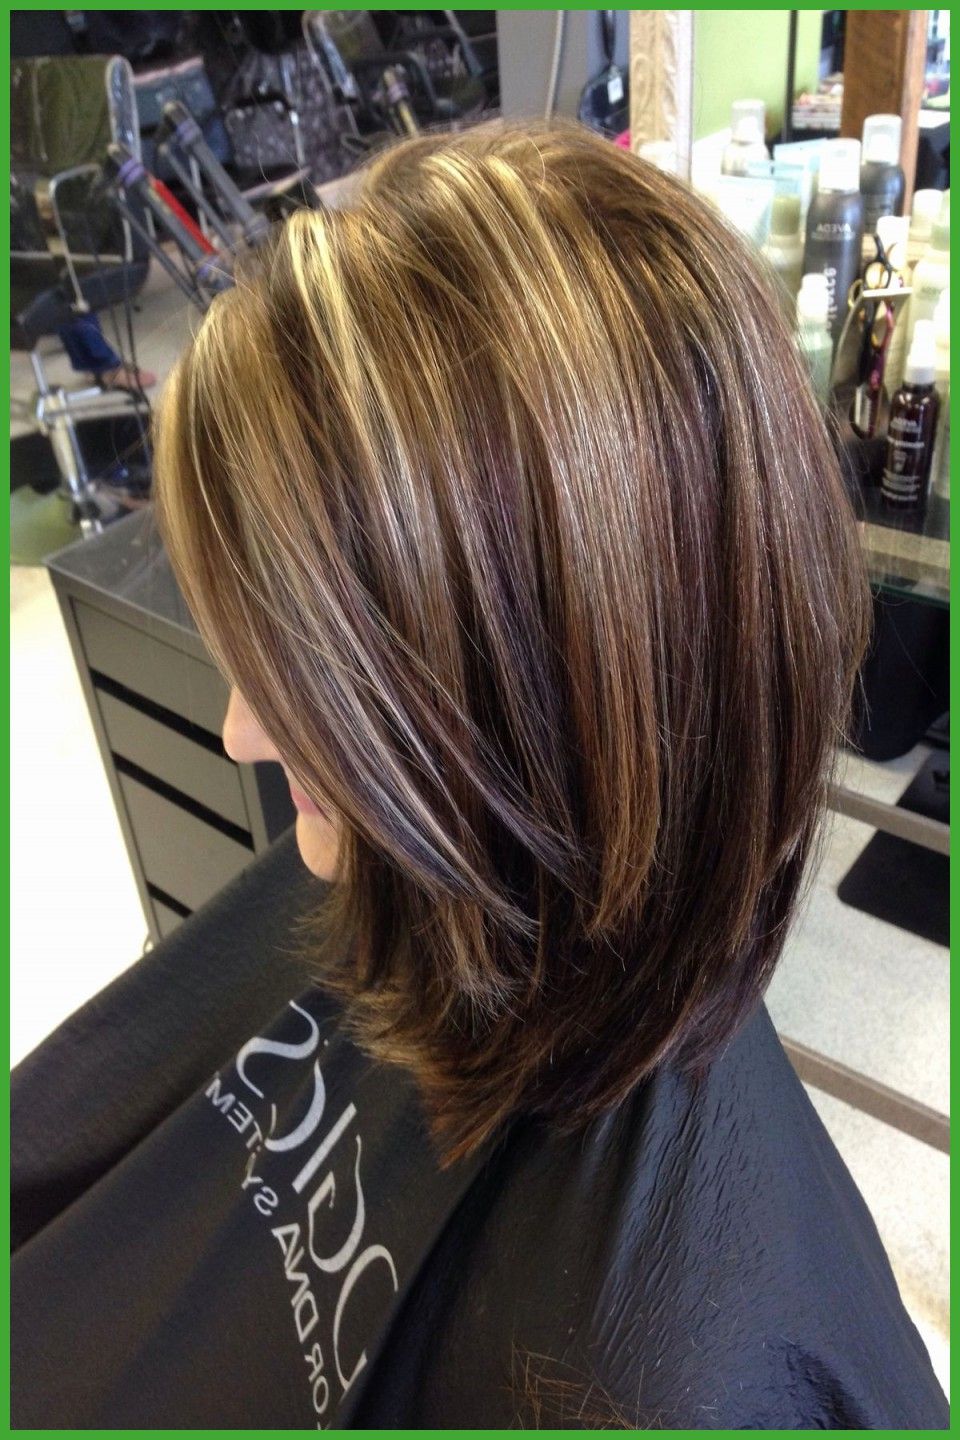 New Layer Cut Hairstyle – Hairstyle Ideas Inside Short Bob Hairstyles With Long V Cut Layers (Gallery 20 of 20)